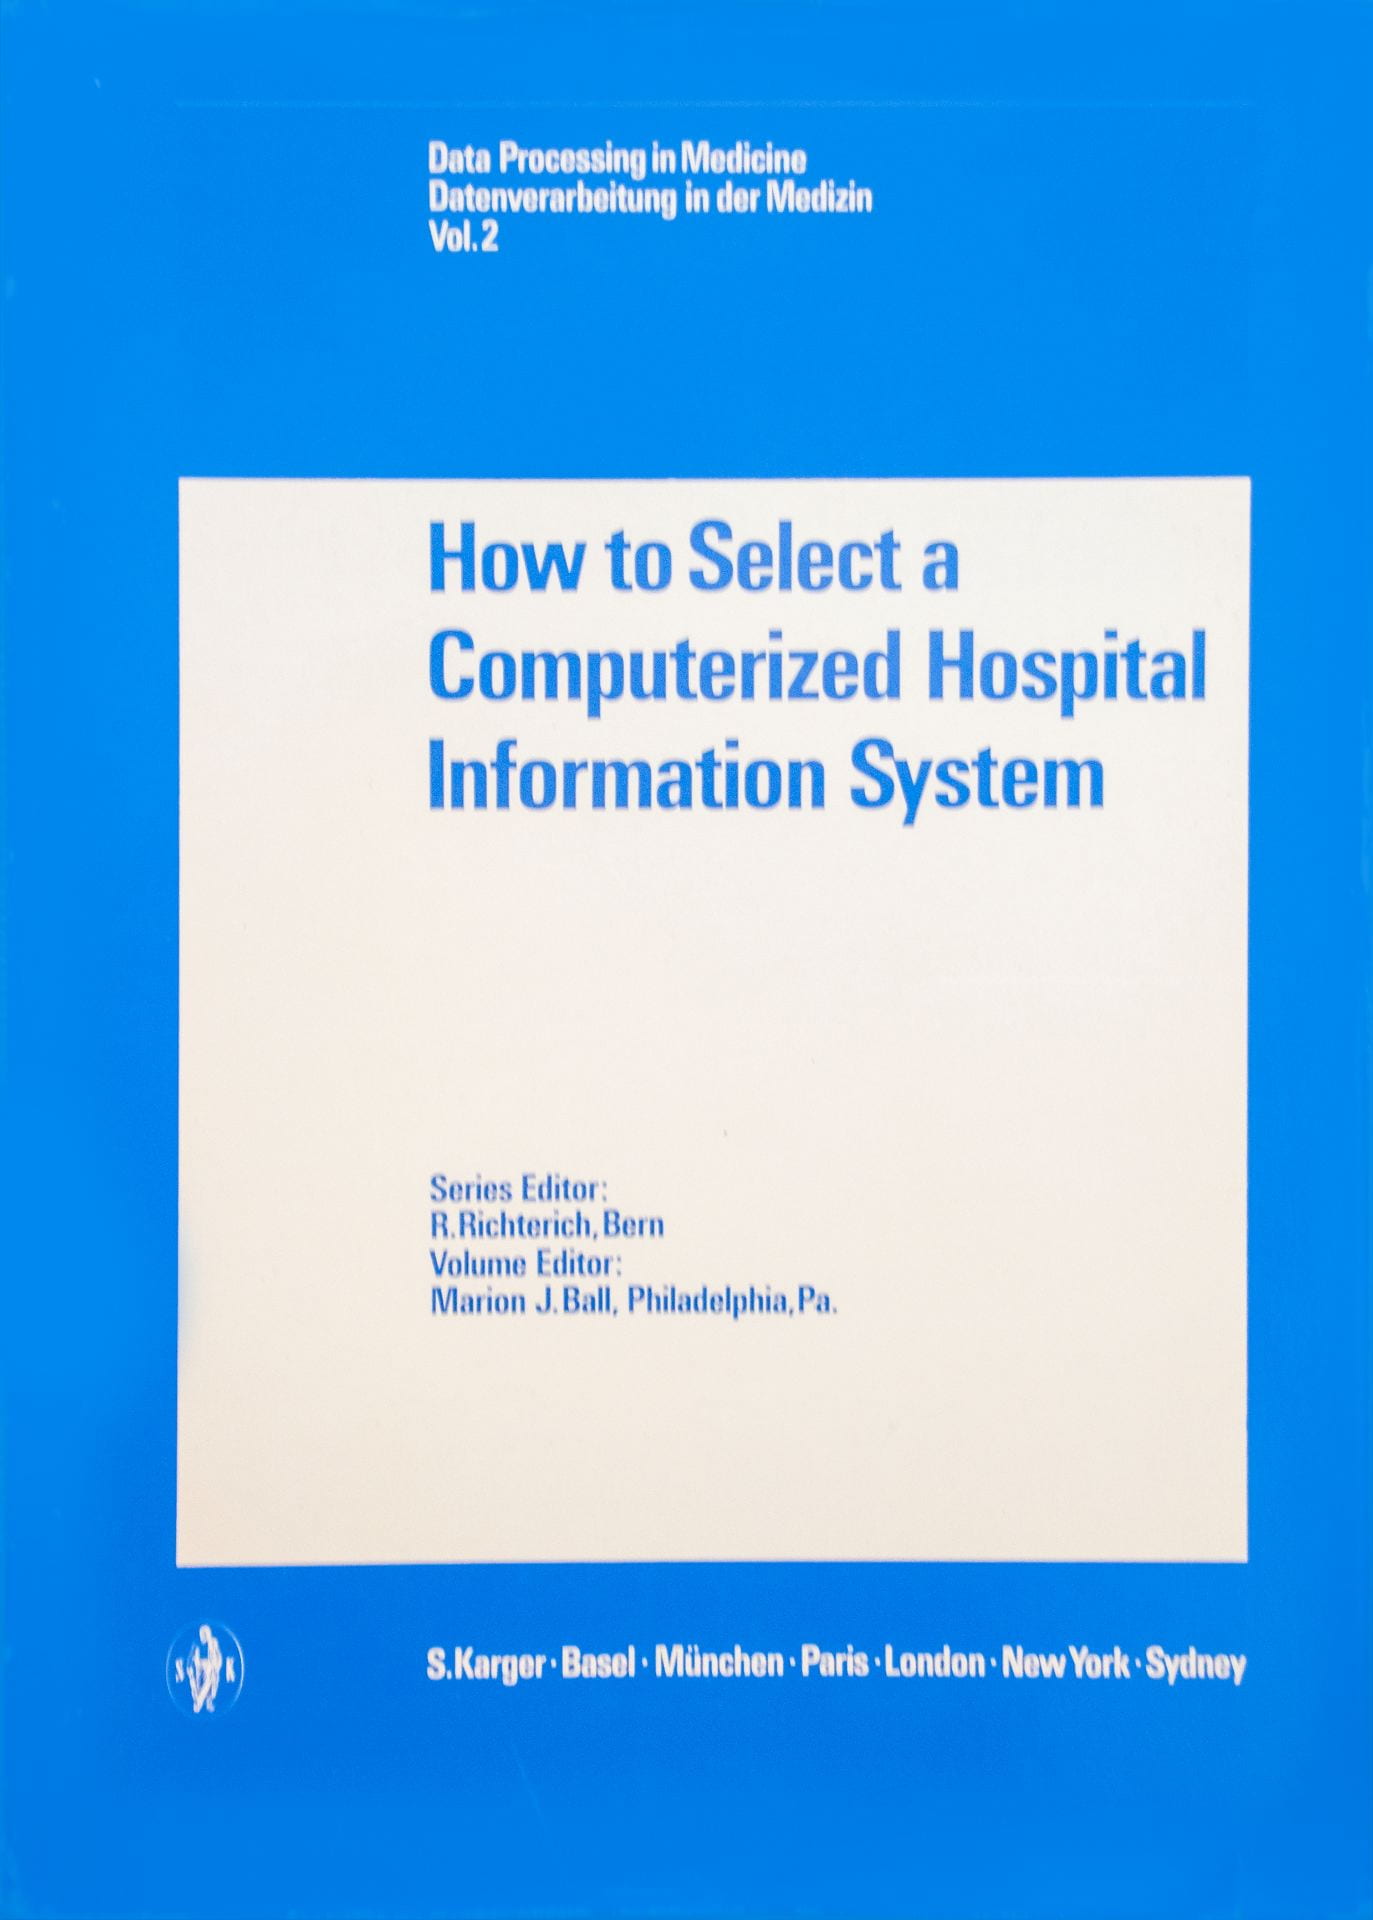 How to Select a Computerized Hospital Information System